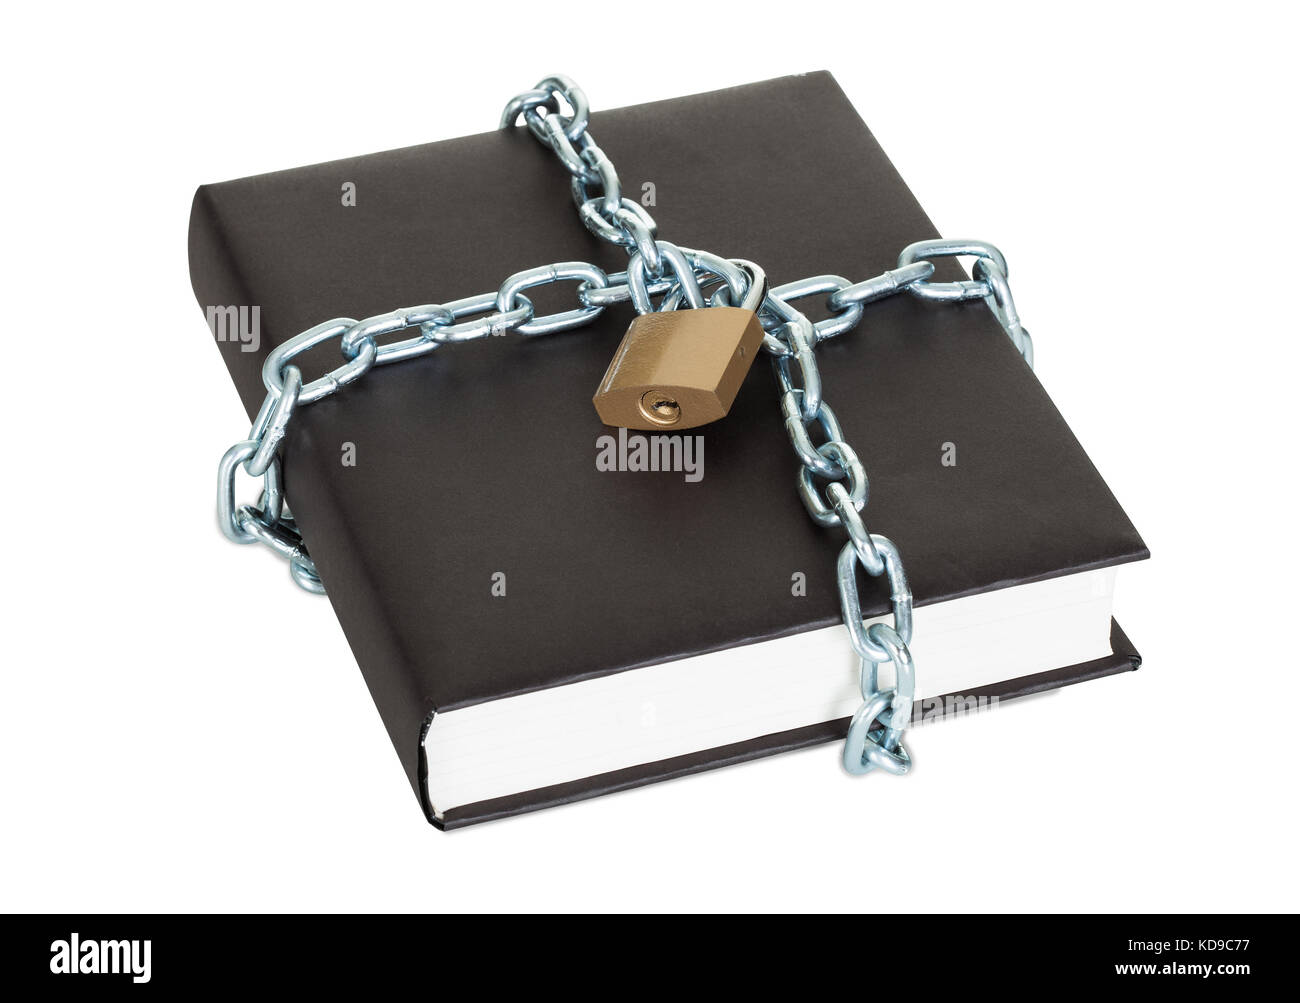 Black book secured by metal chain and lock. Isolated on white Stock Photo